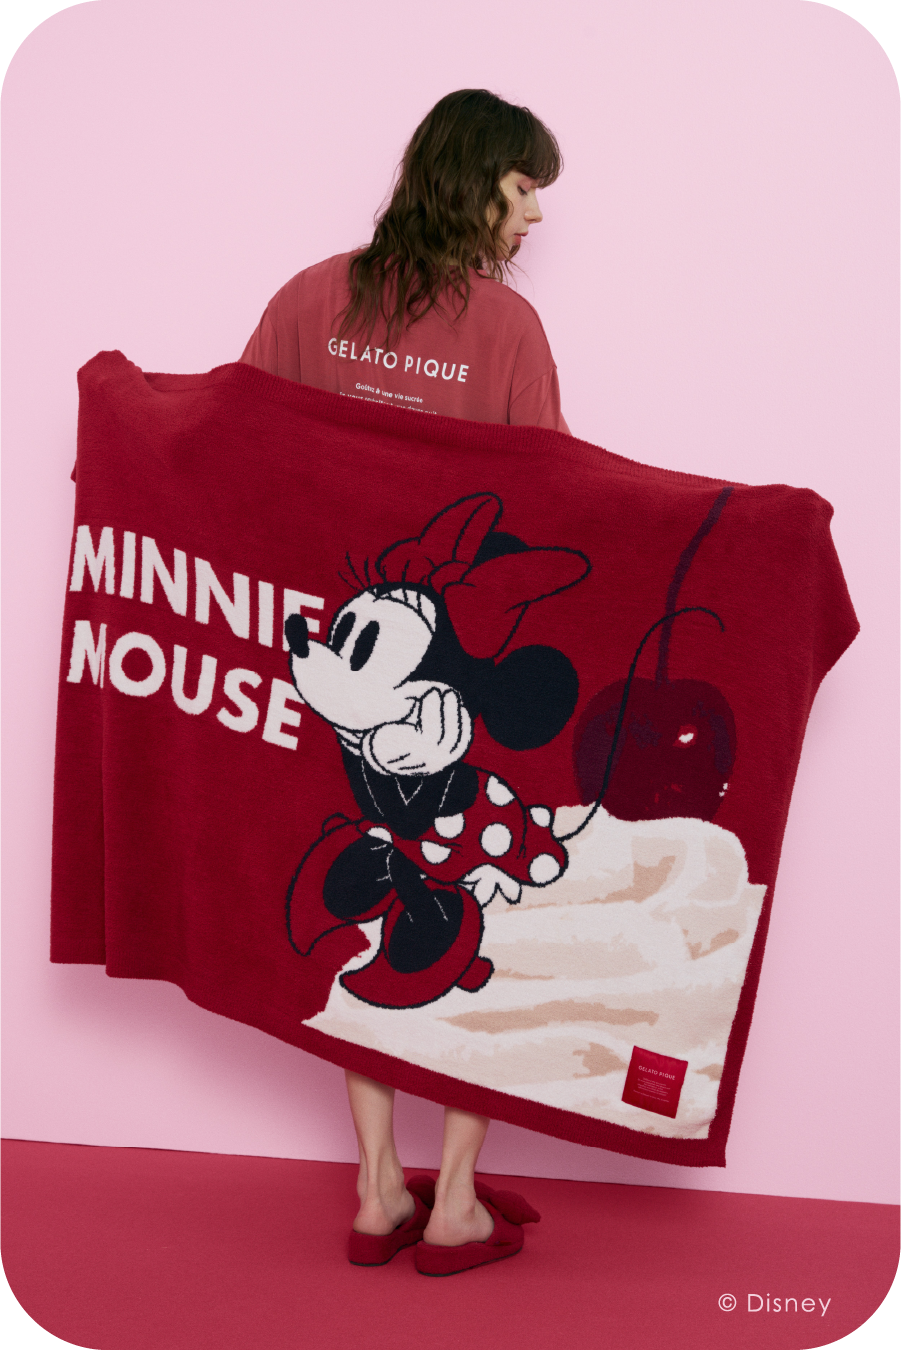 Disney MINNIE MOUSE COLLECTION │ gelato pique (ジェラートピケ 